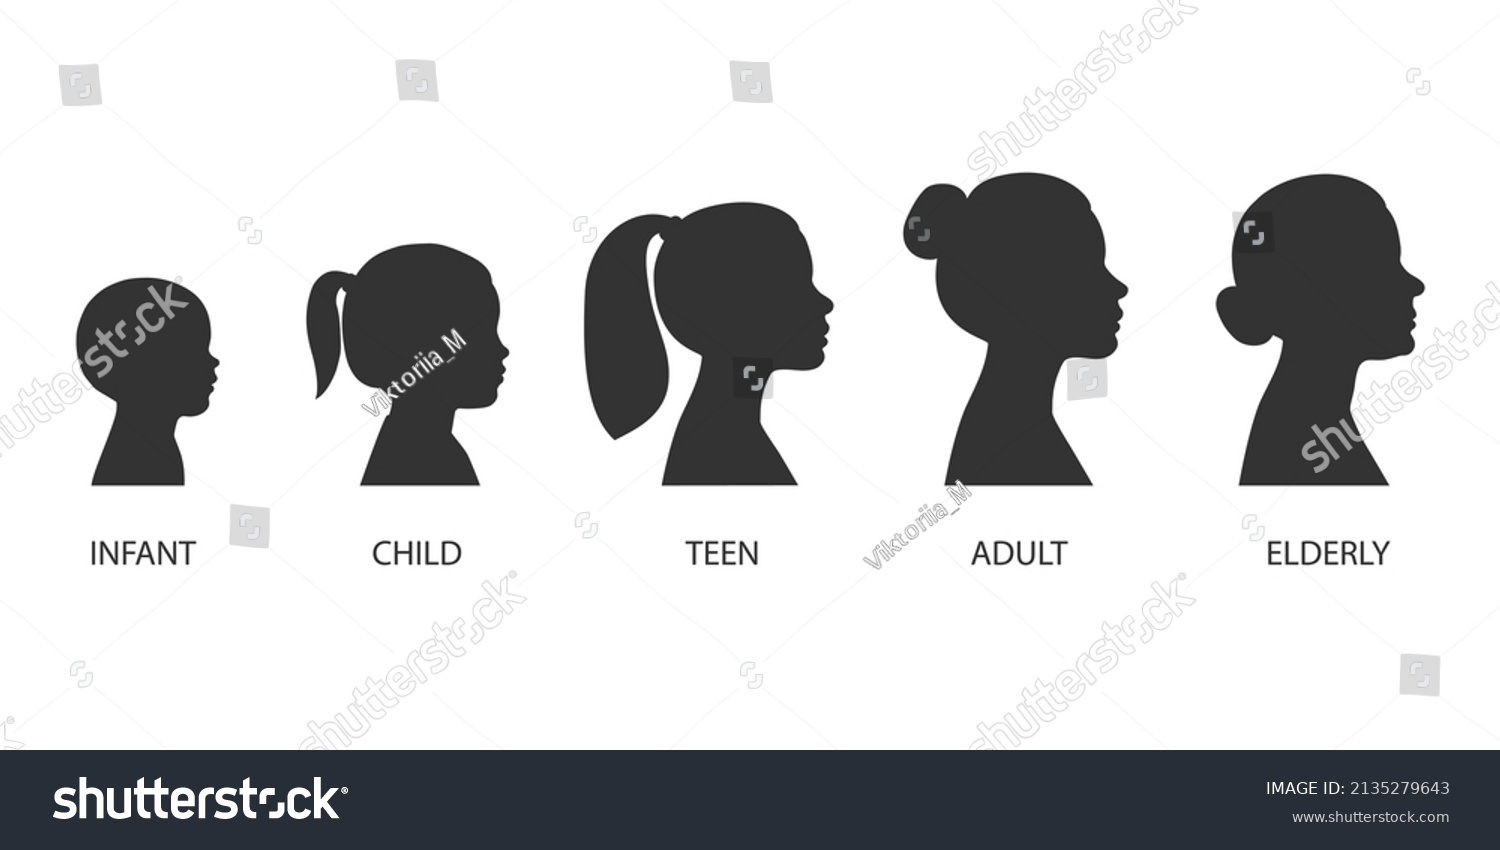 SVG of The stages of a woman's growing up - infant, child, teen, adult, elderly. Collection of silhouettes of women of different ages. Vector illustration isolated on white background svg